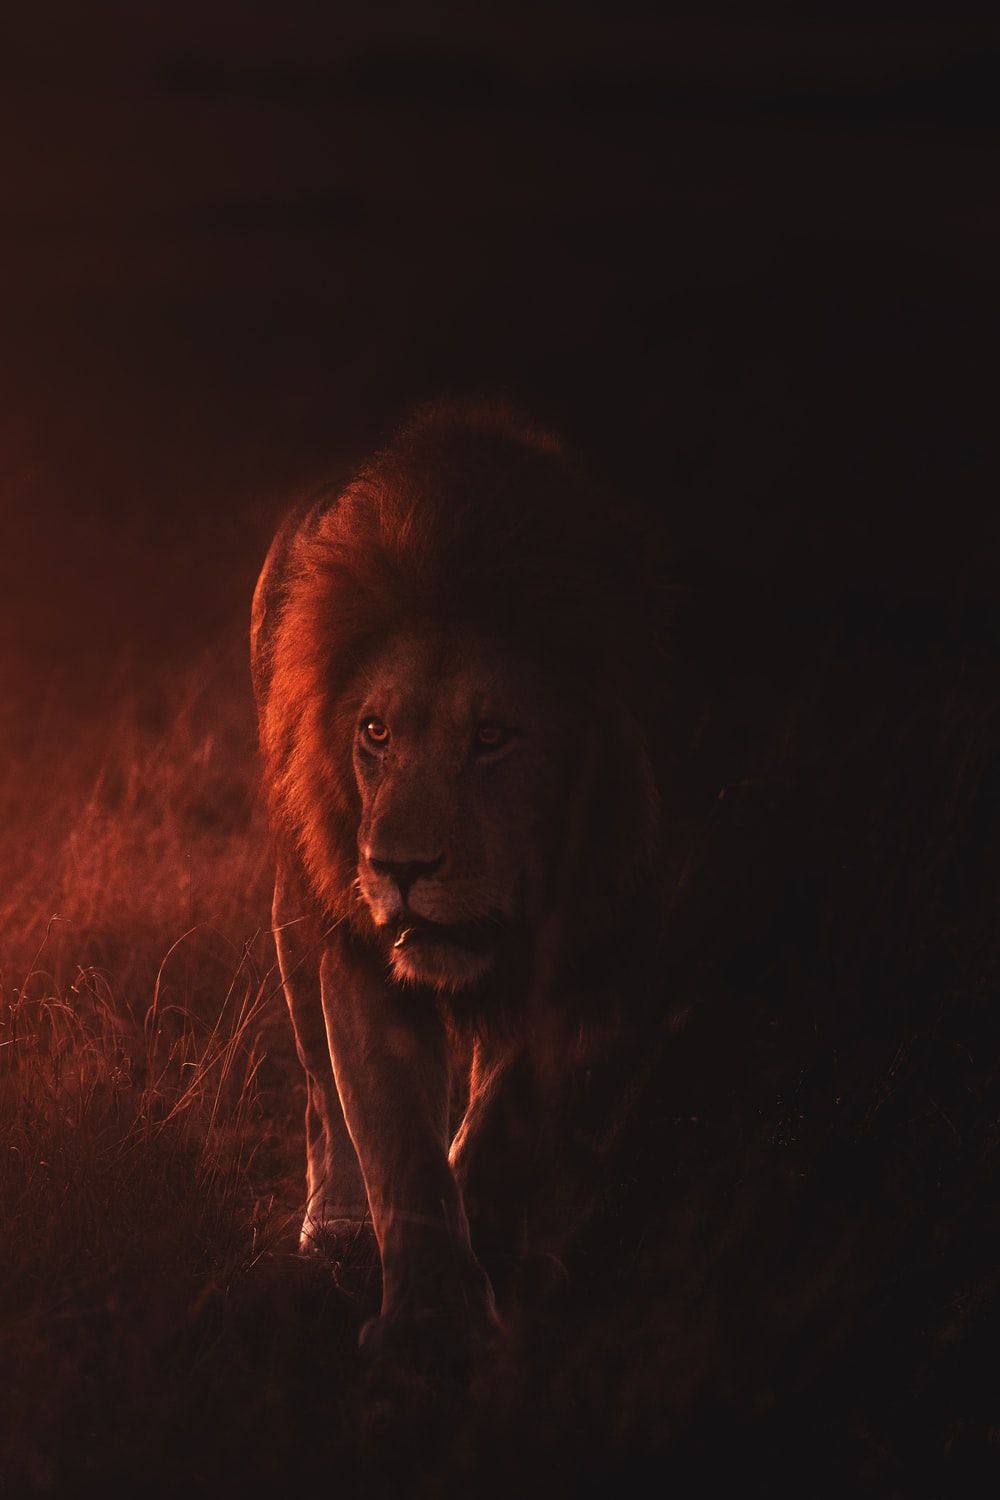 Lion King Picture. Download Free Image